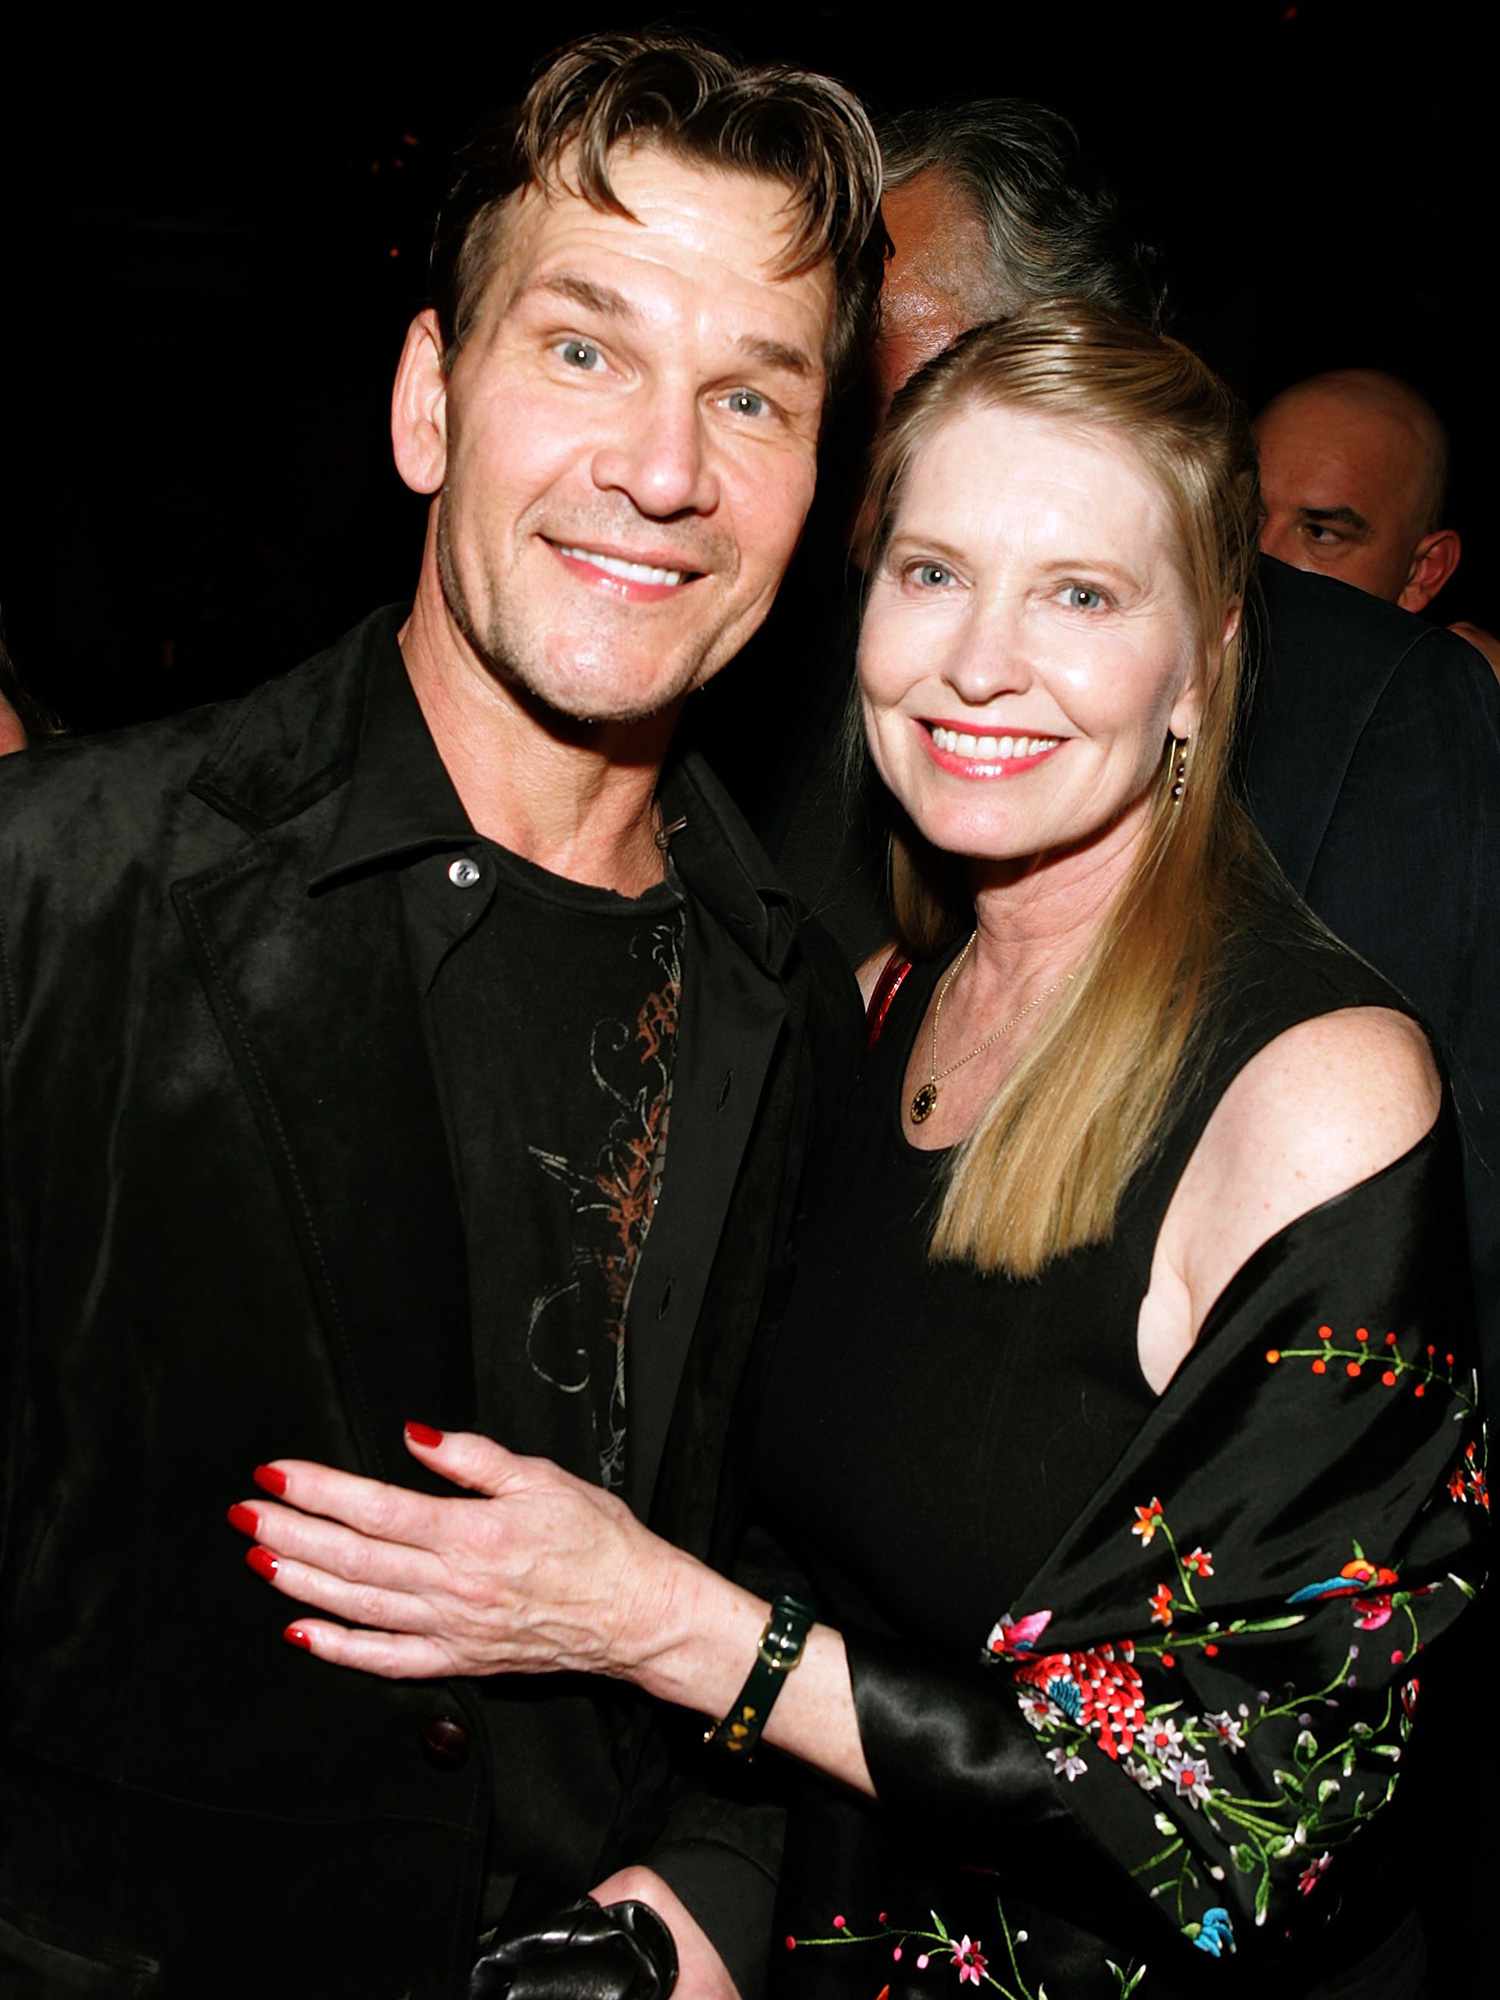 Patrick Swayze and Lisa Niemi, pose at the premiere of MGM's "Rocky Balboa" after party in 2006